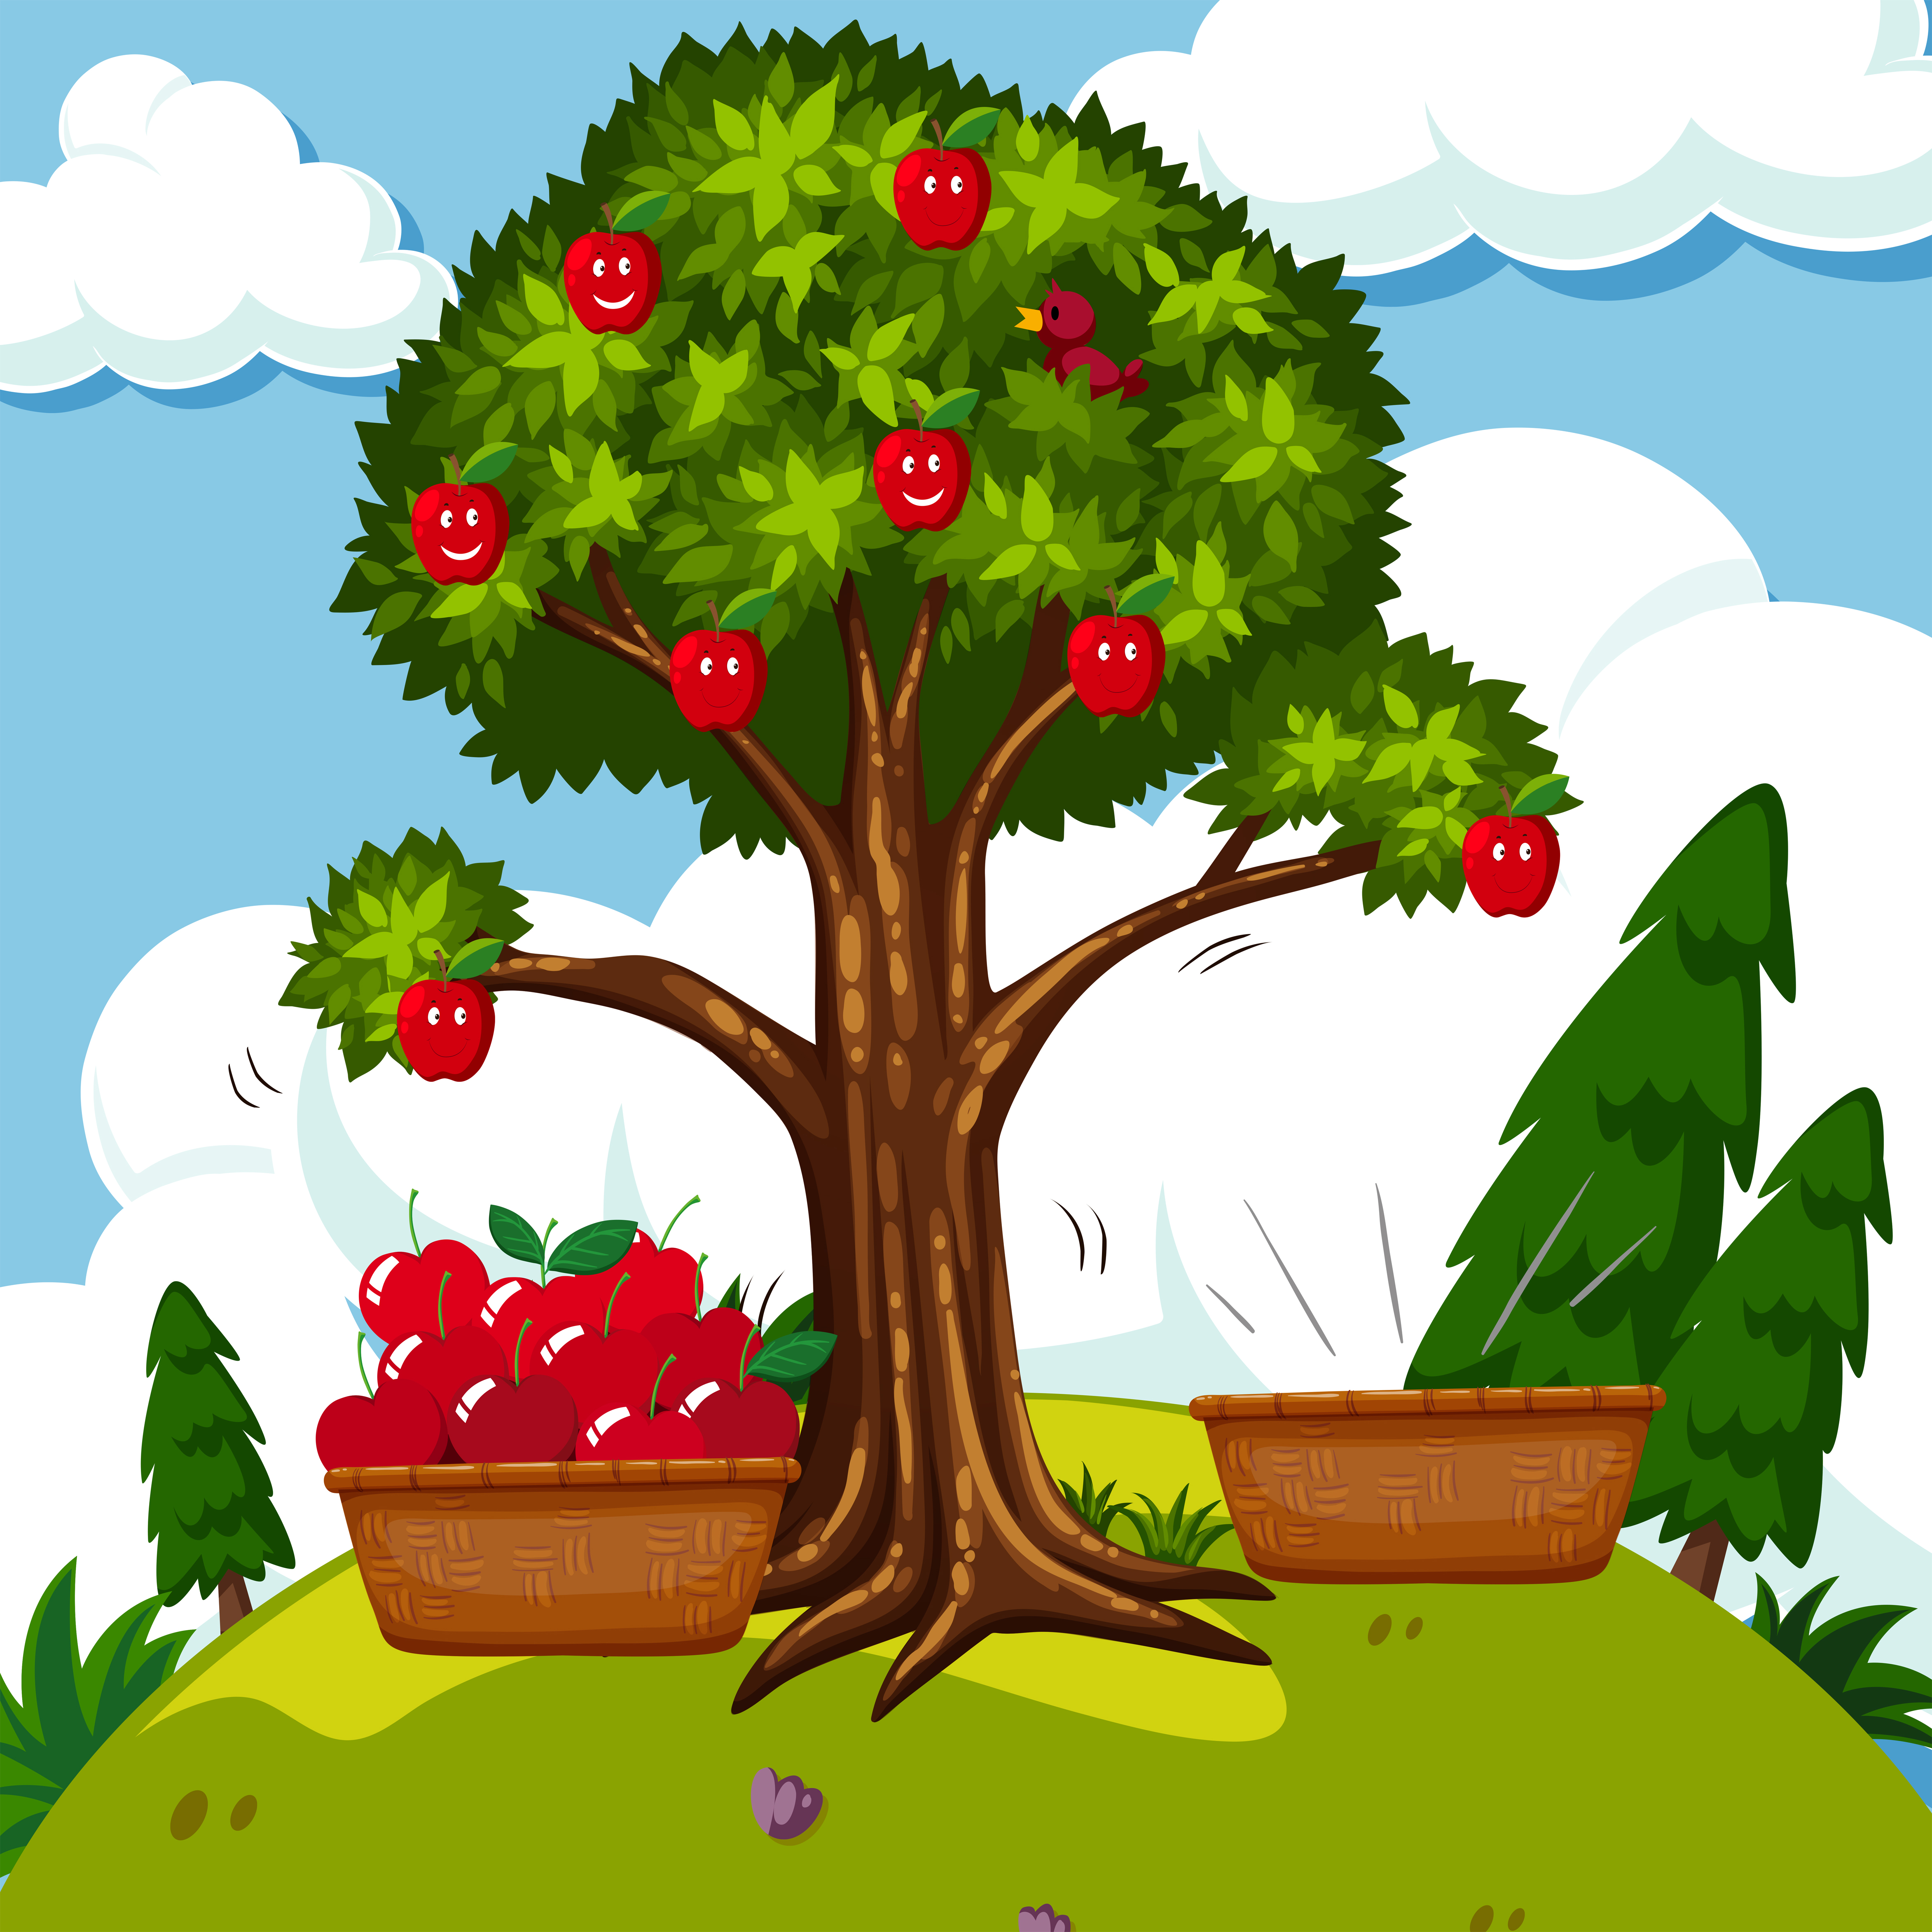 Red apple tree in the field